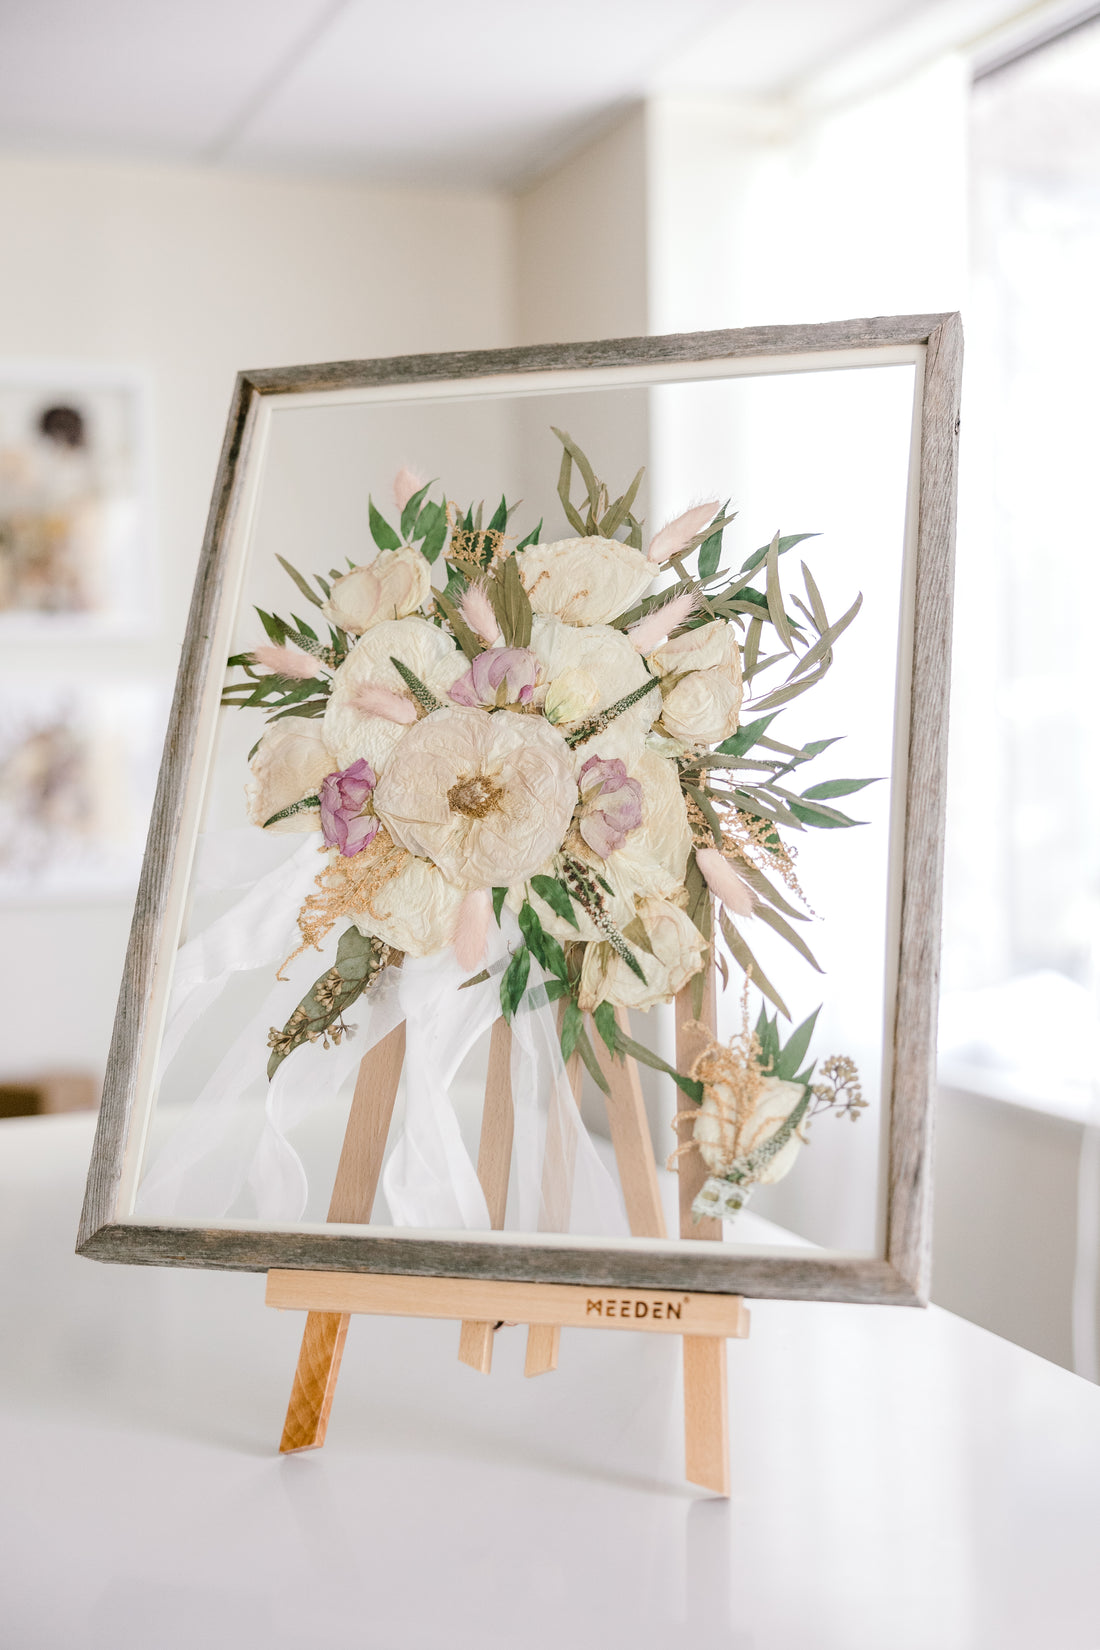 A white and pink wedding bouquet that has been pressed with a boutonniere inside a barn wood frame.